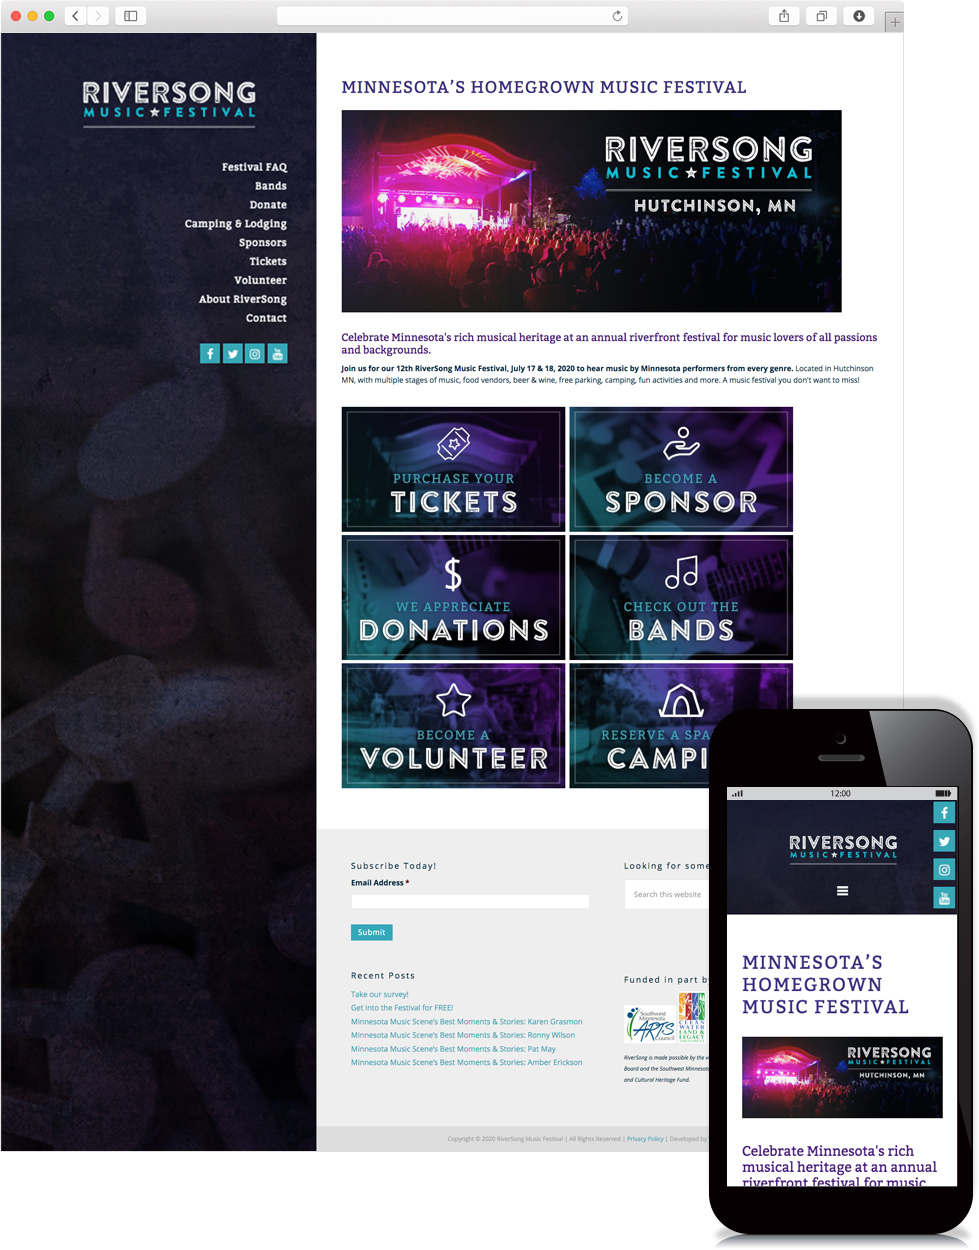 Riversong Homepage layout